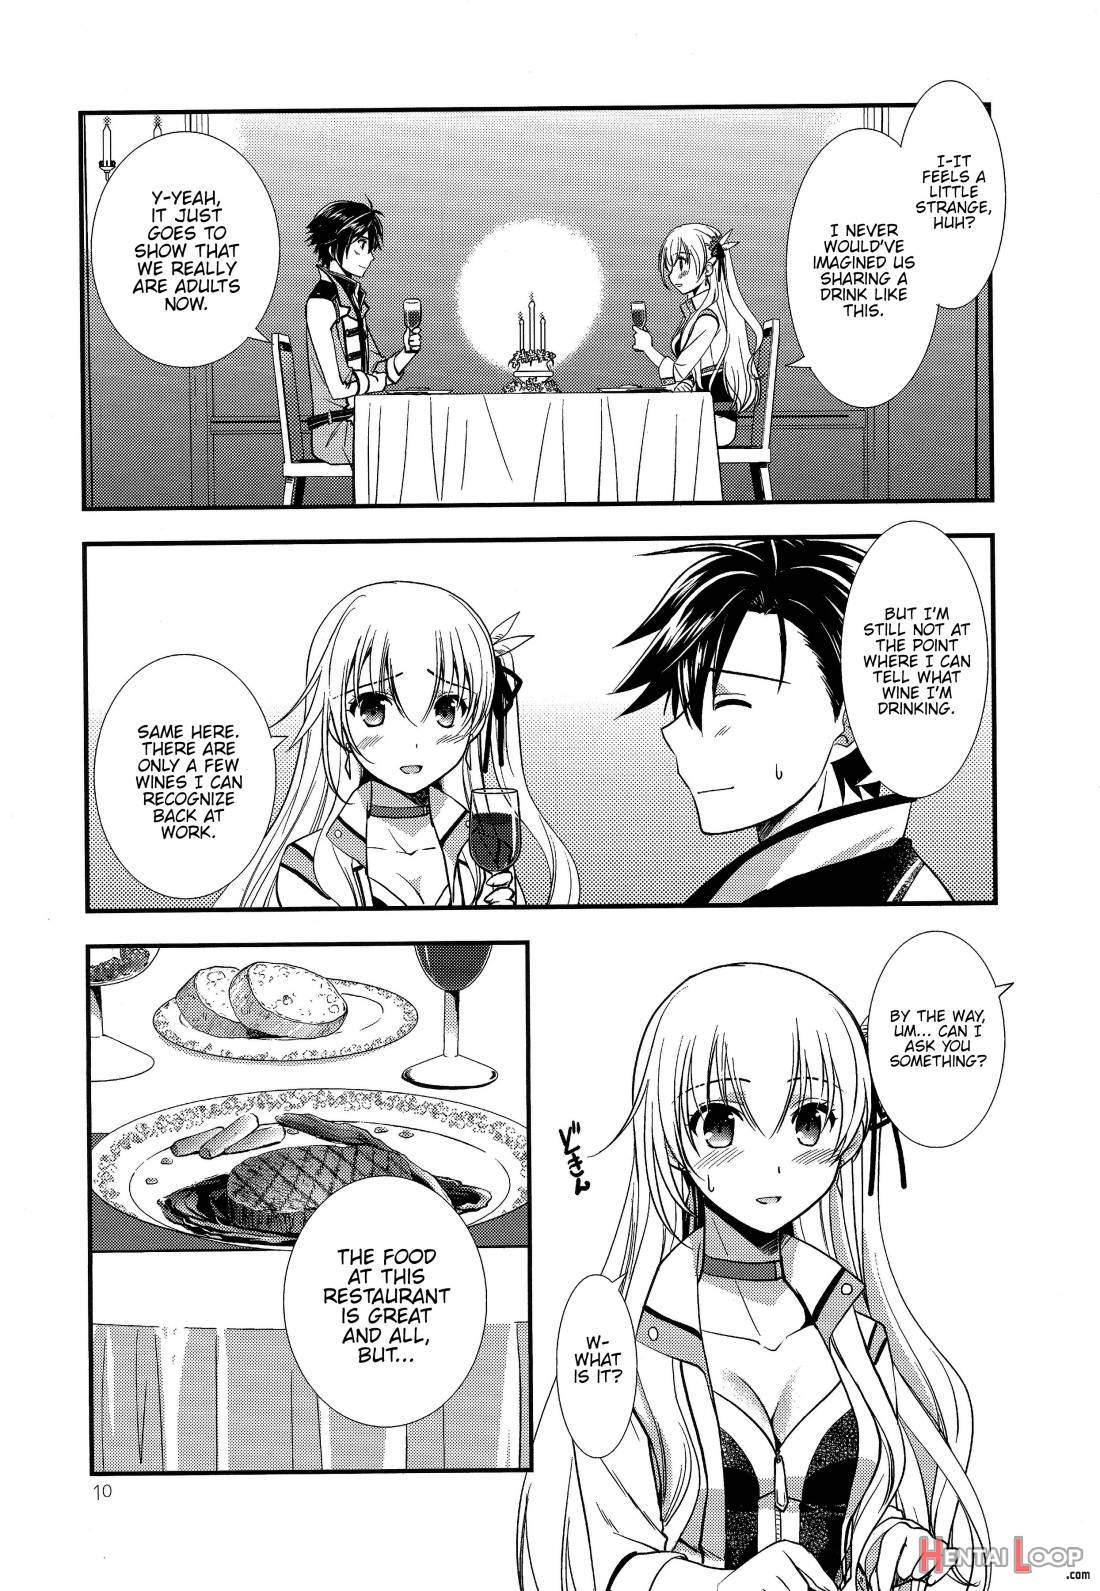 Houkago Date page 8